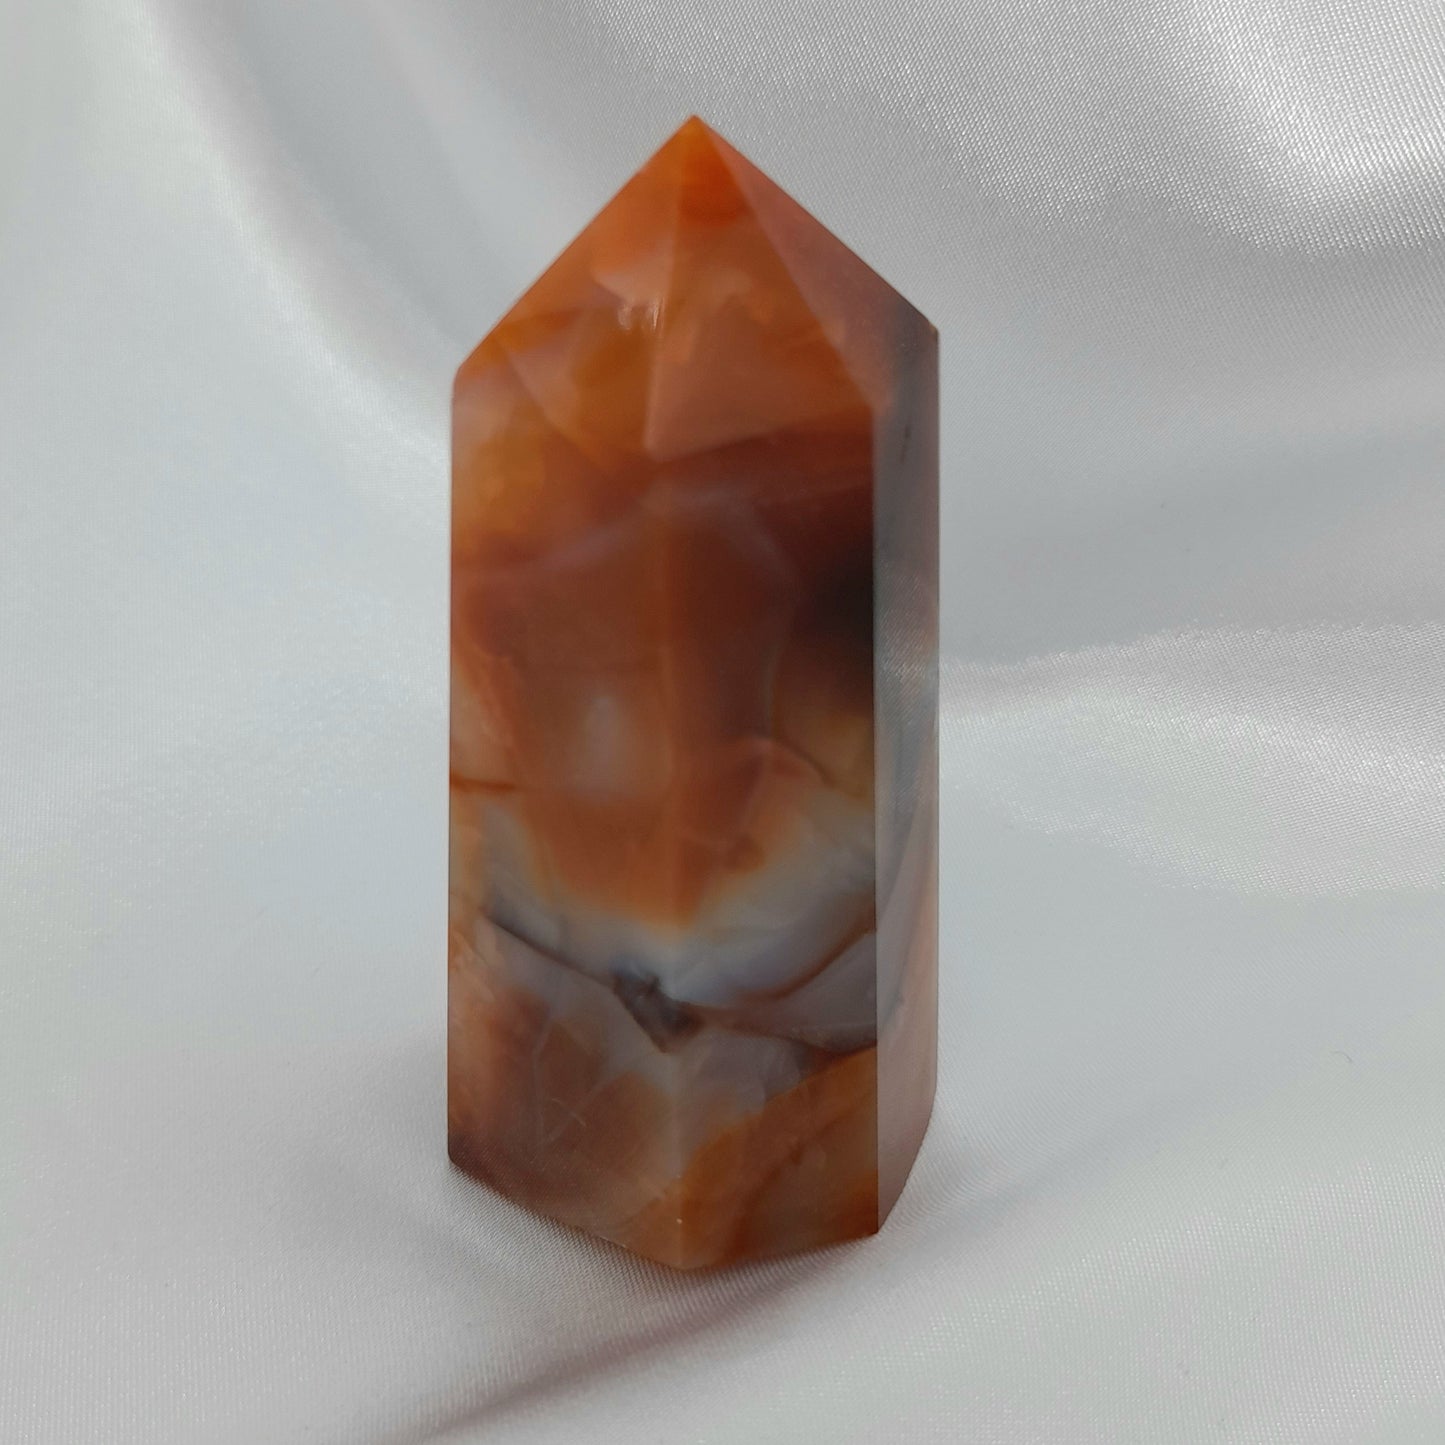 Carnelian Point #2 Crystal - Motivational Energy, Love, Luck, and Transformation - Red Hue (Color Varies) - Approximately 8cm - Unique Natural Variations.